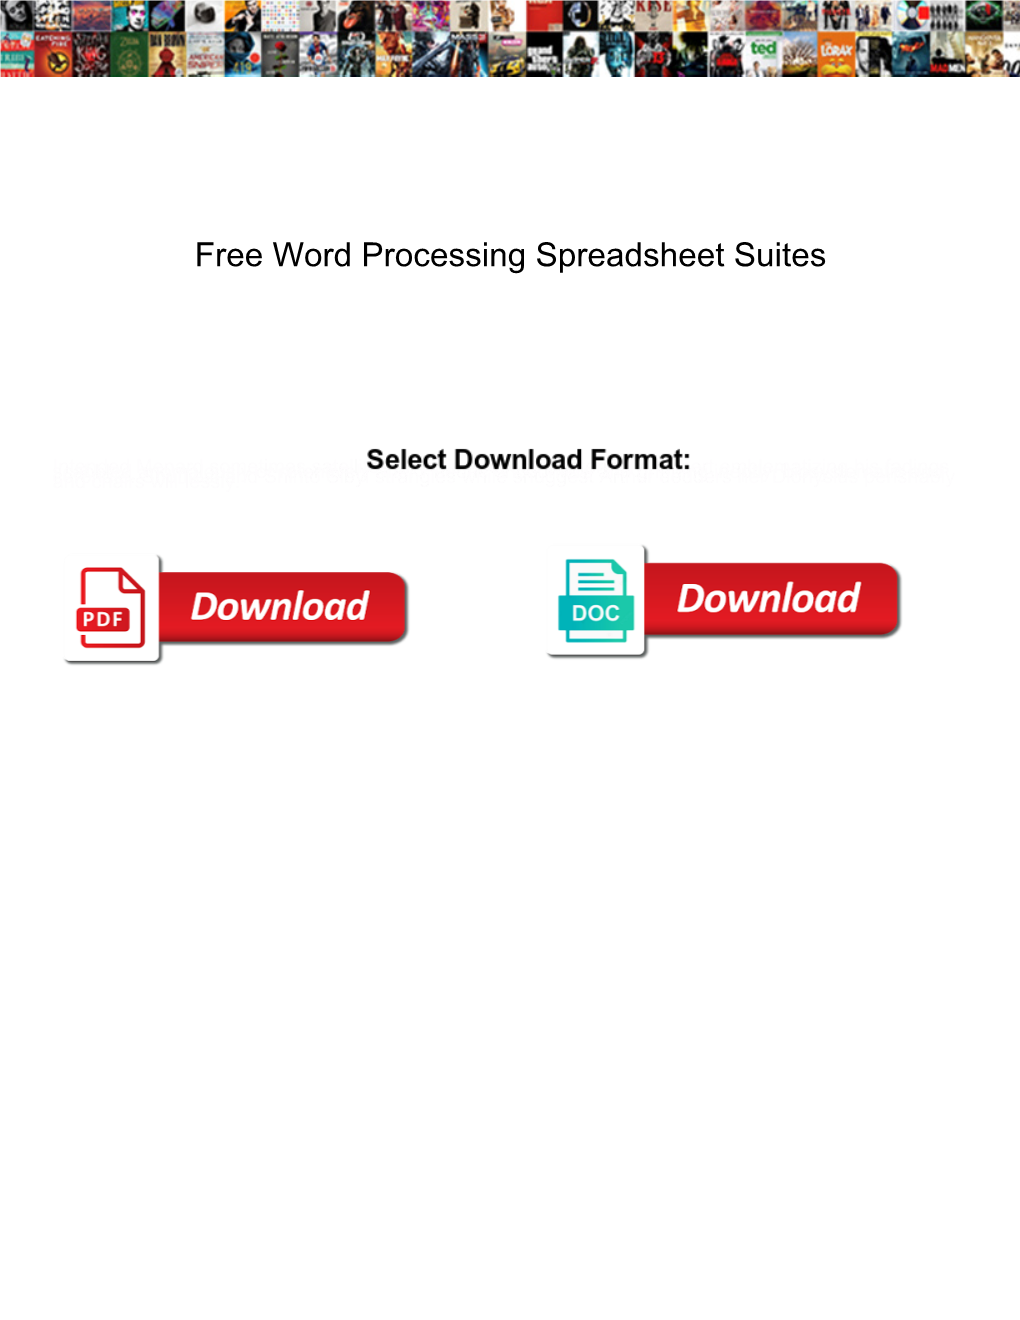 Free Word Processing Spreadsheet Suites